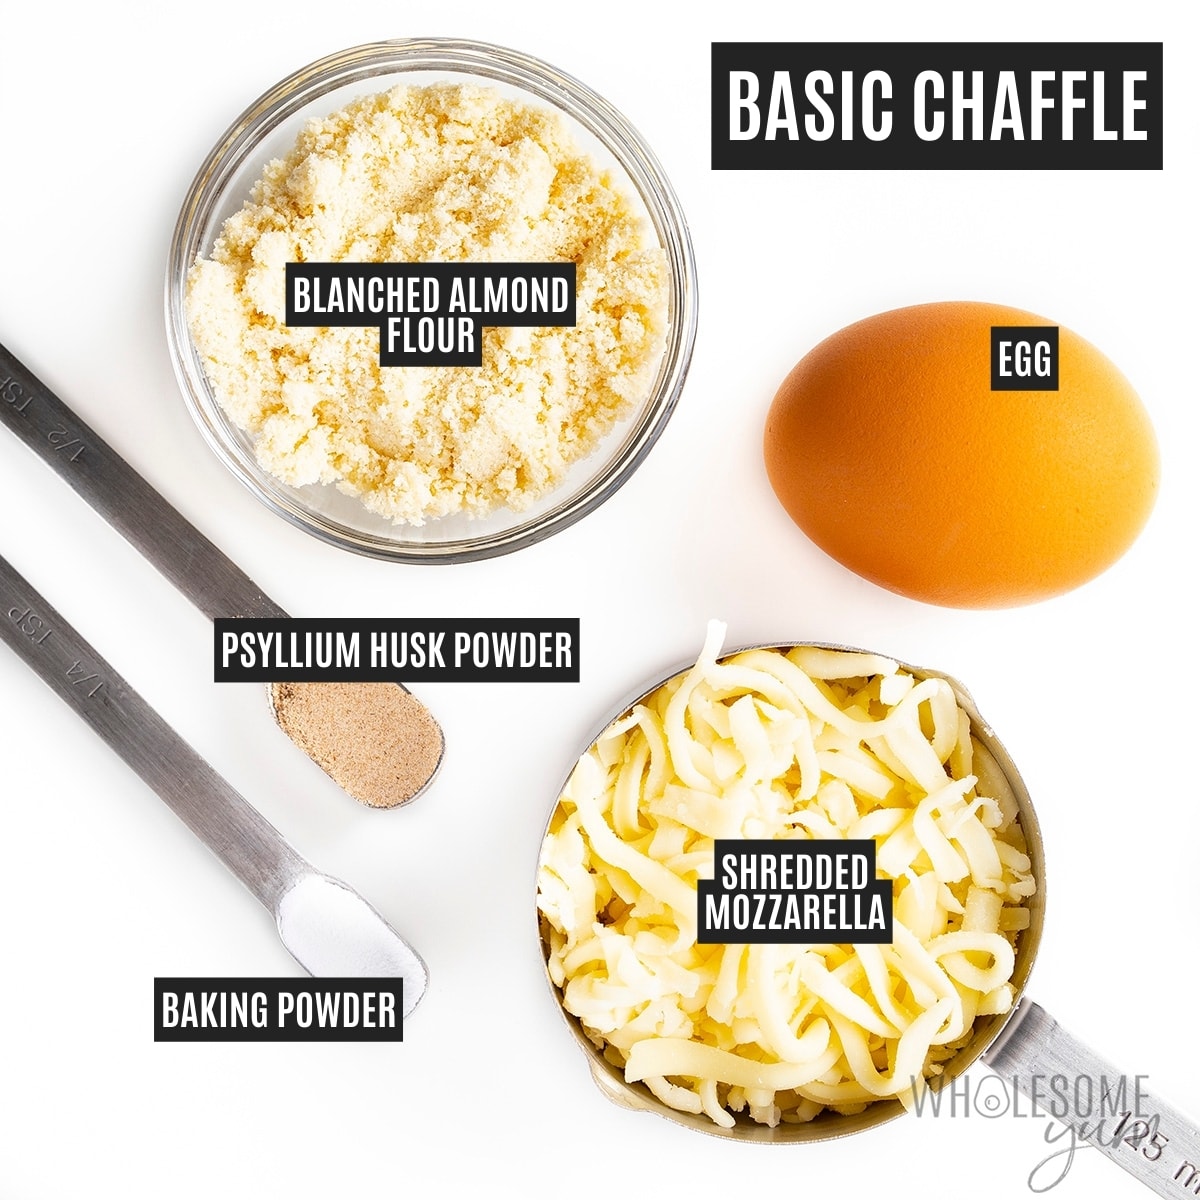 Basic chaffle recipe ingredients in bowls.